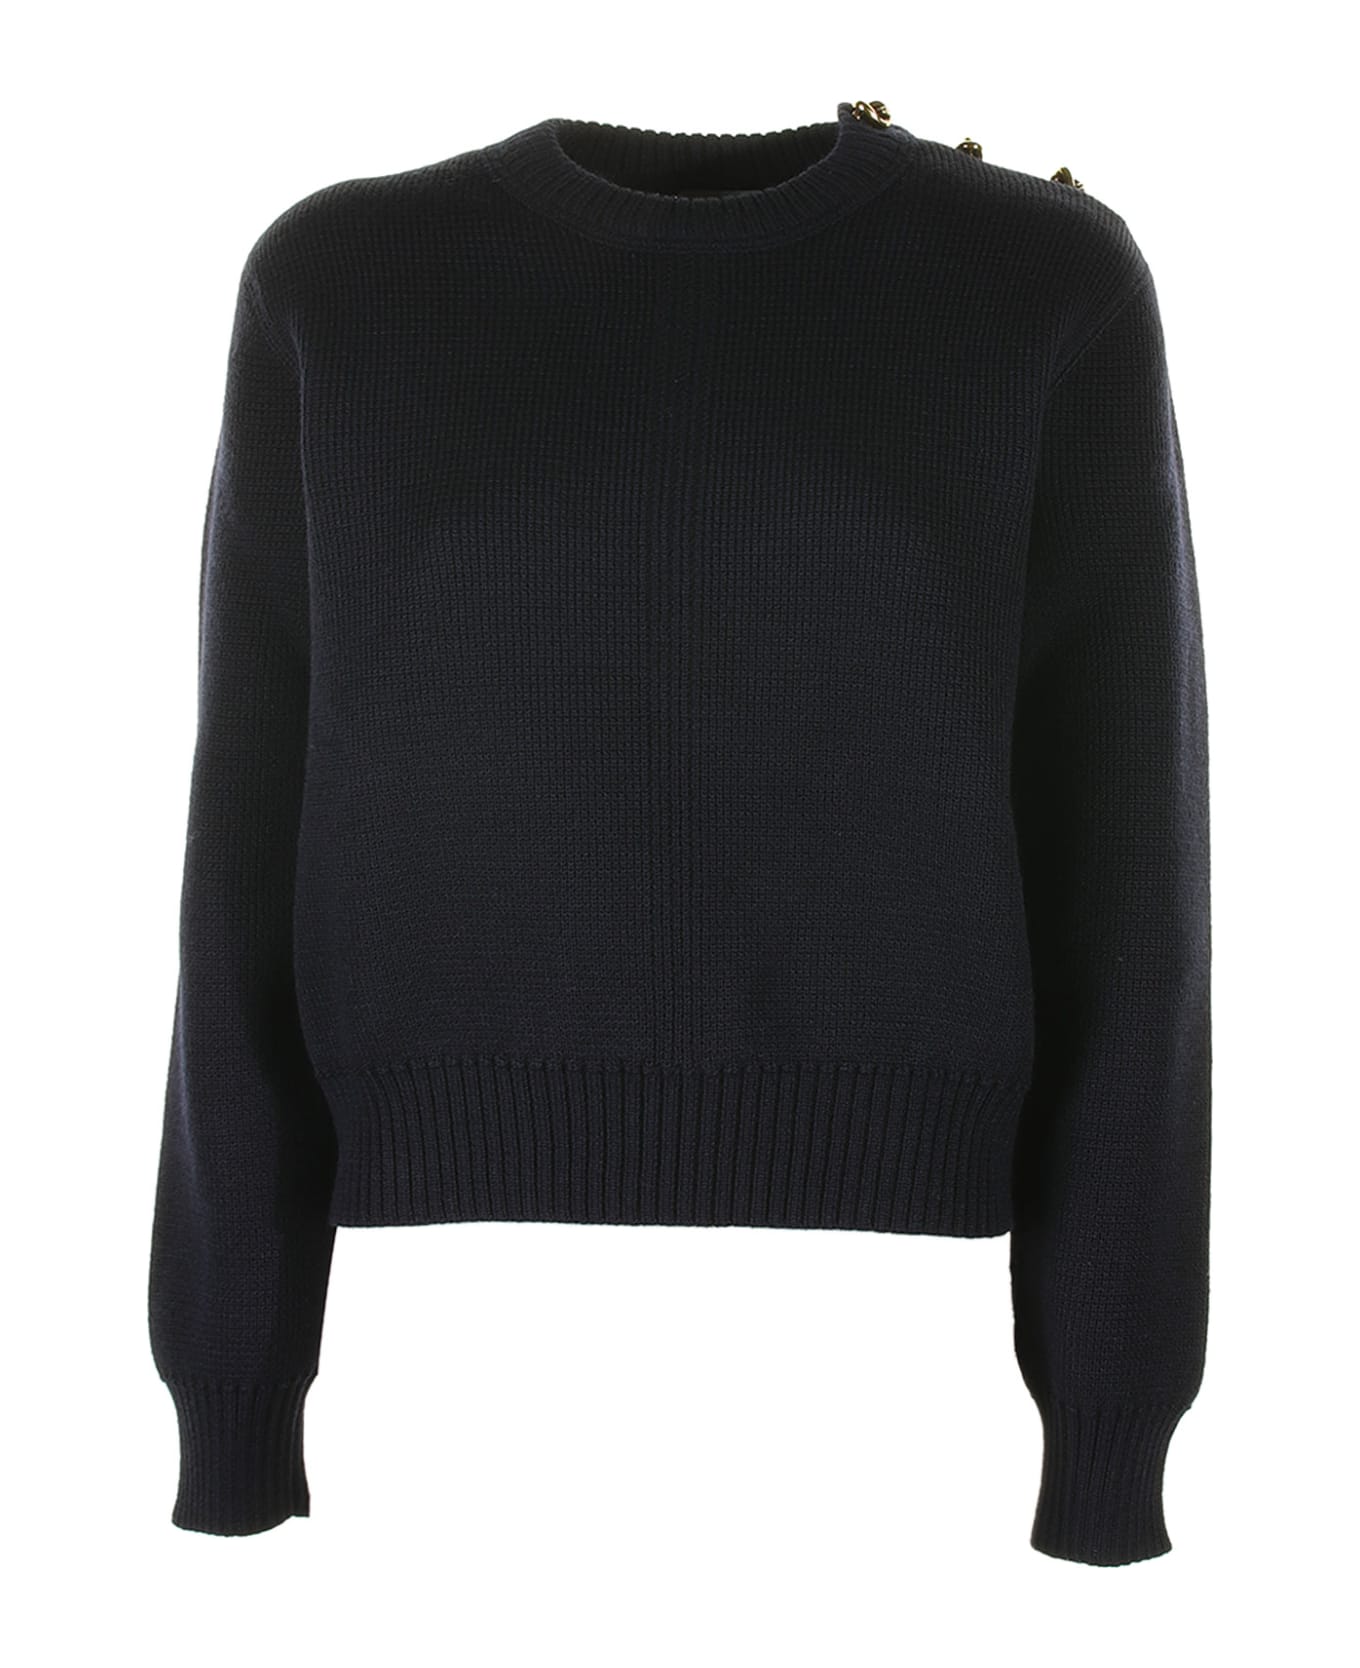 Bottega Veneta Wool Sweater With Metal Knot Buttons - ABISSO BLUE ニットウェア